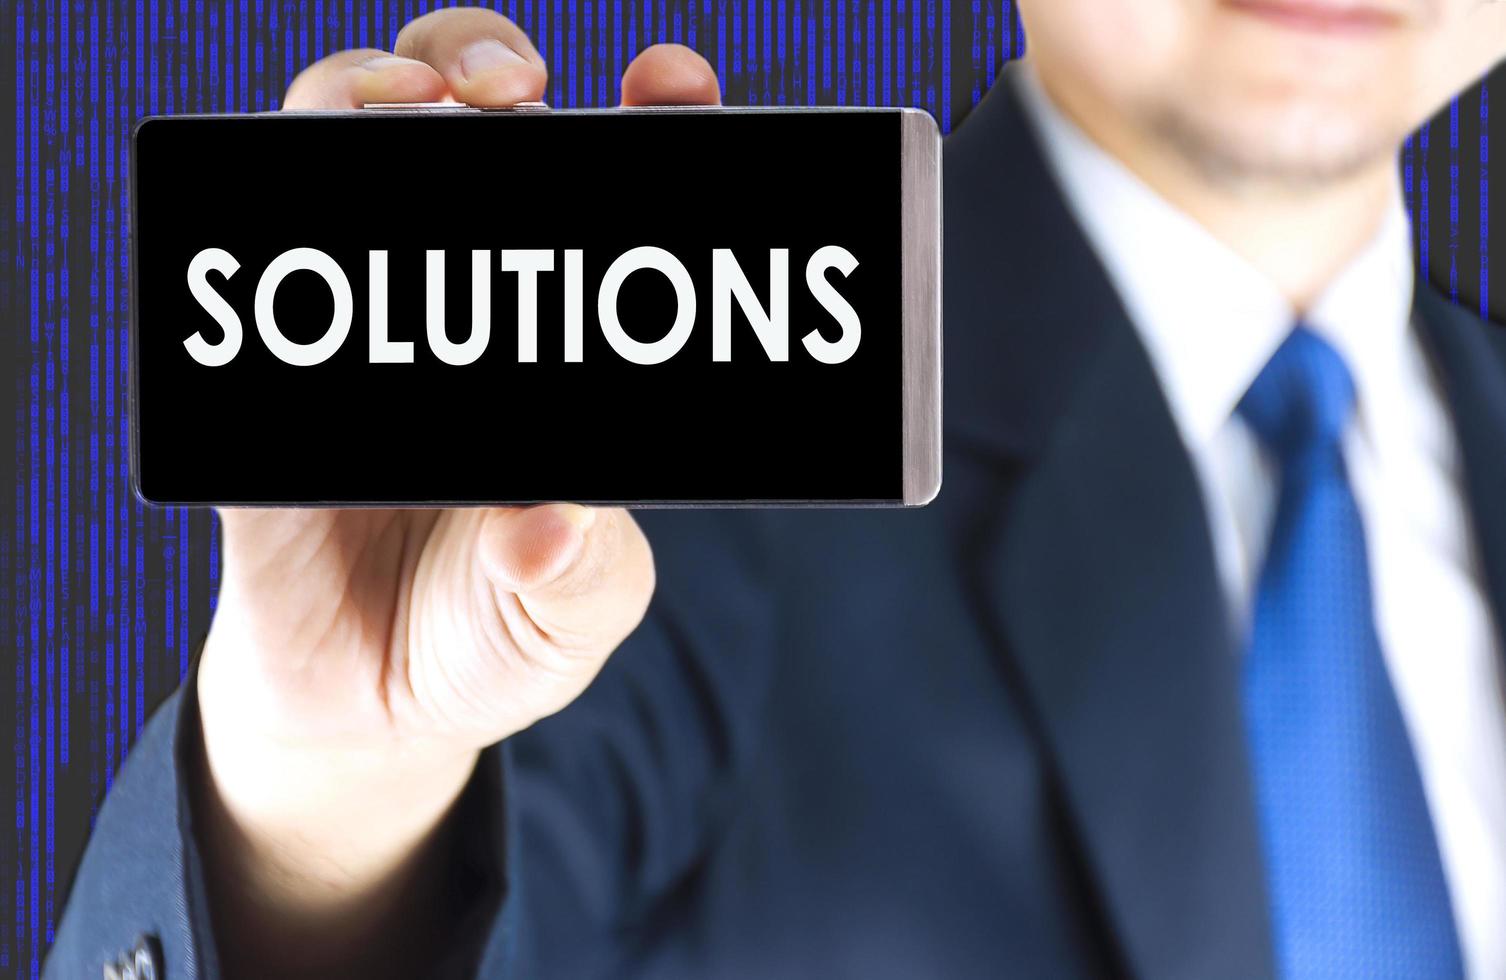 SOLUTIONS word on mobile phone screen in blurred young businessman hand and digital technology background, business concept photo